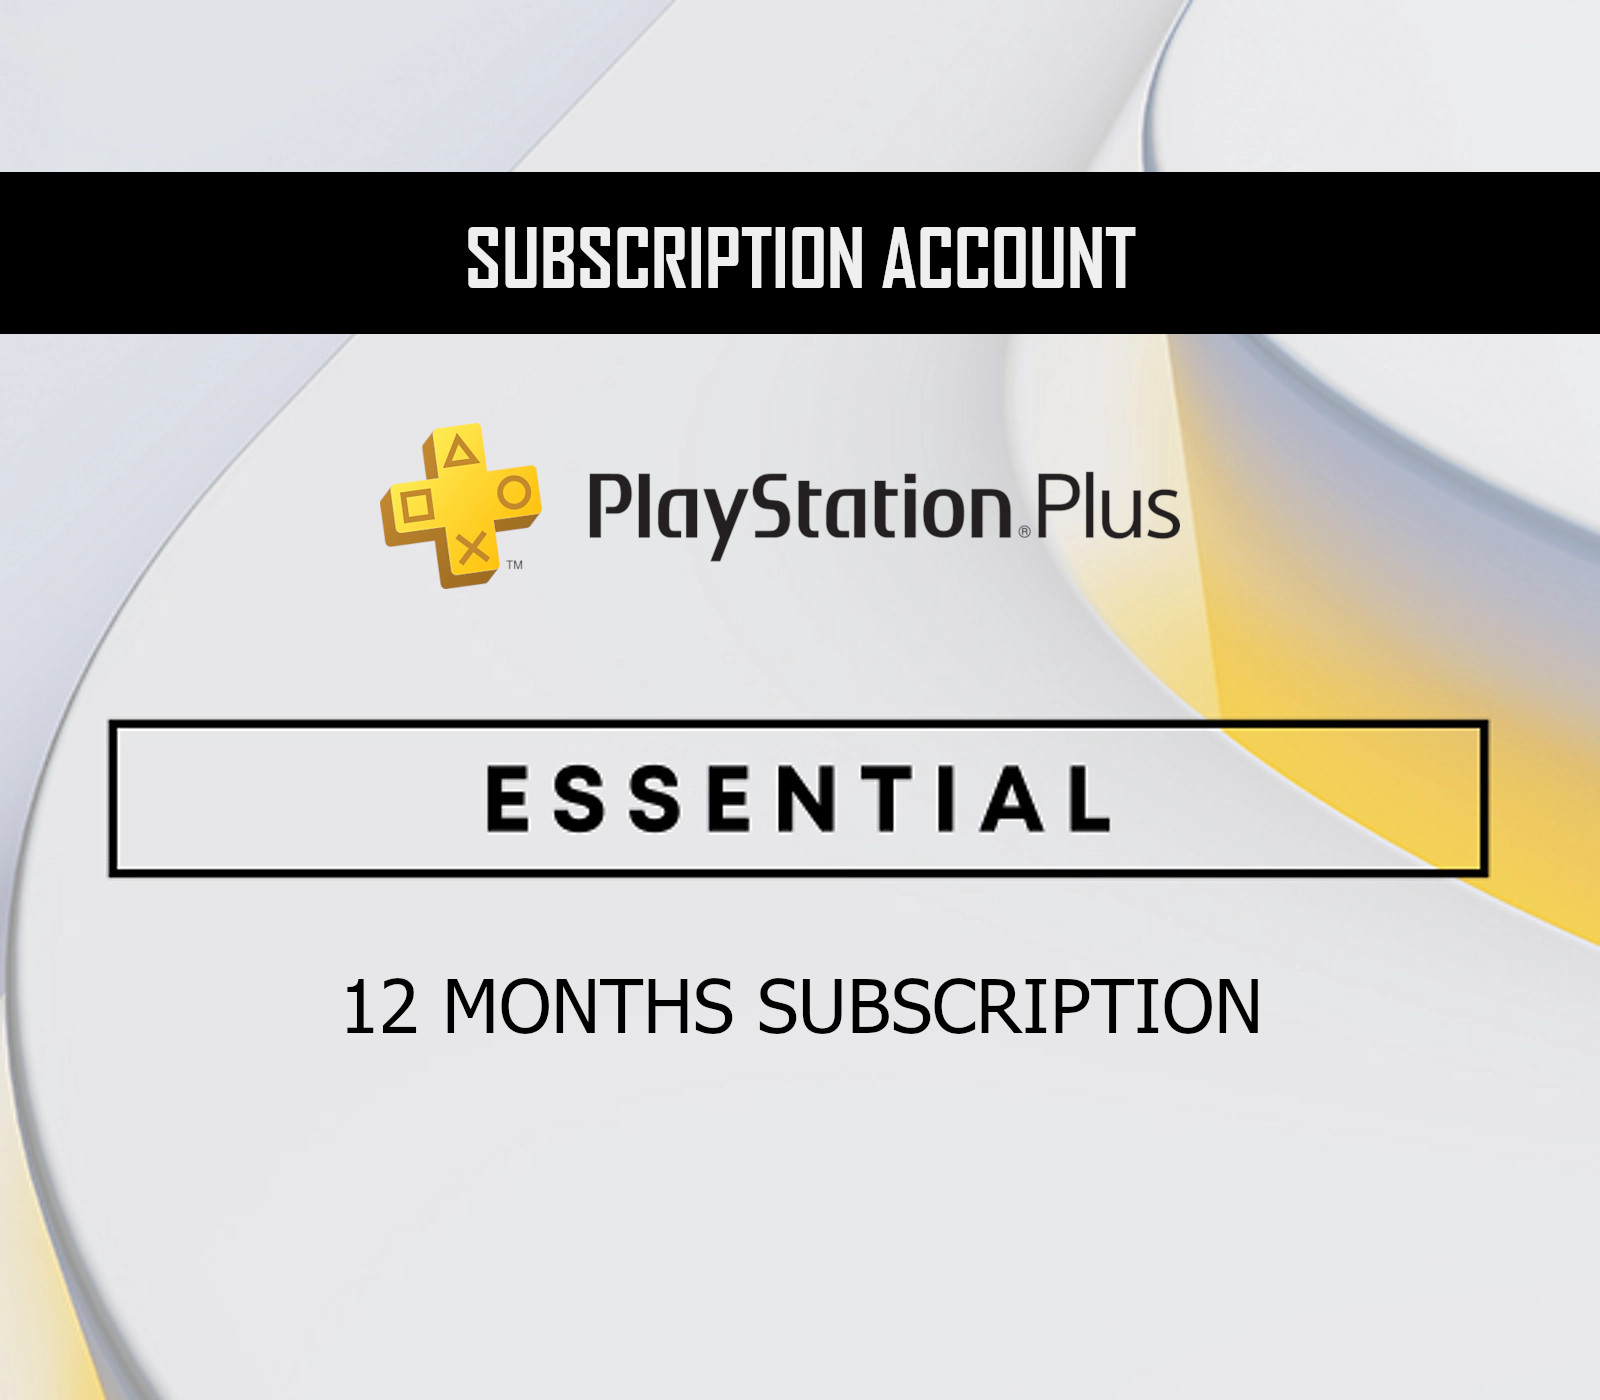 Score a 12-month subscription to PlayStation Plus Essential for